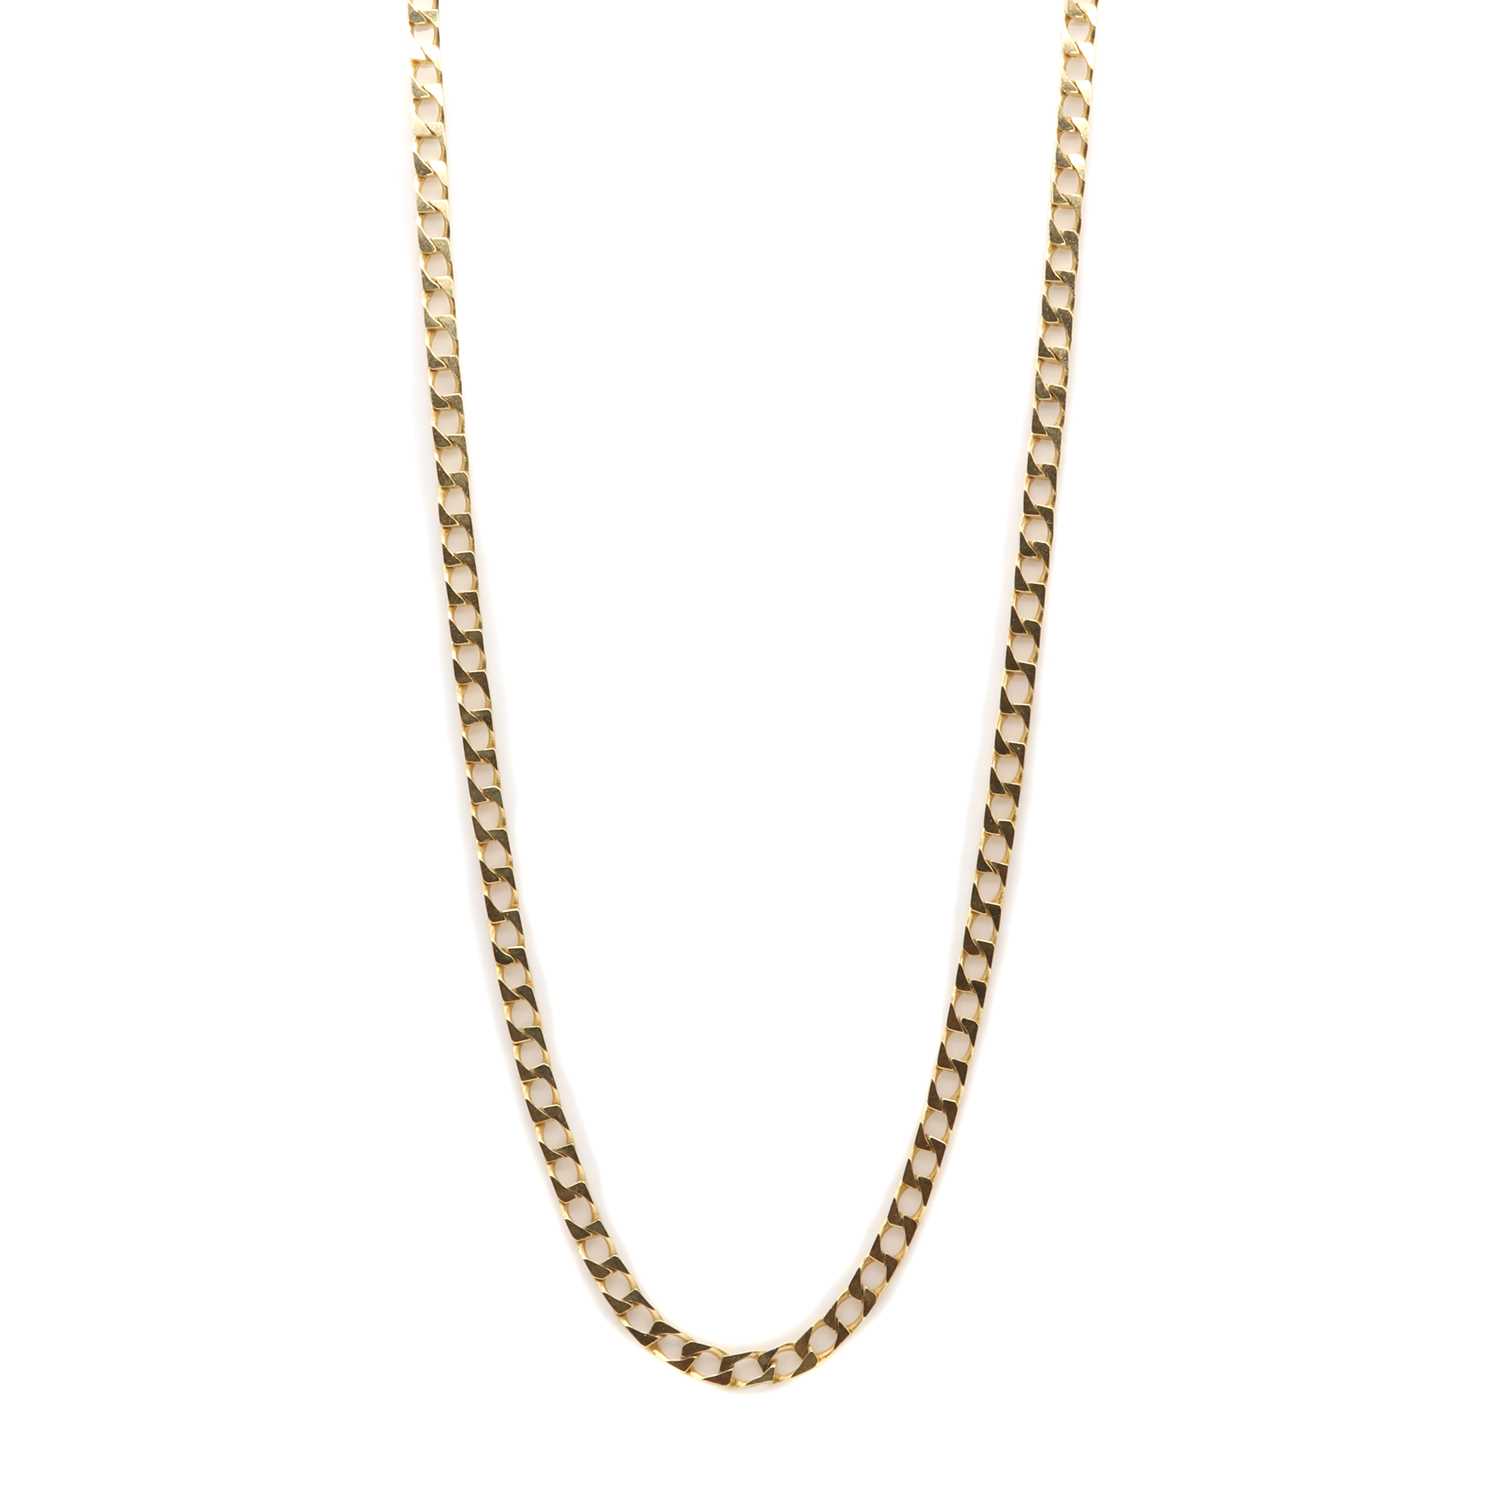 Lot 291 - A gold metric curb link necklace, by UnoAErre